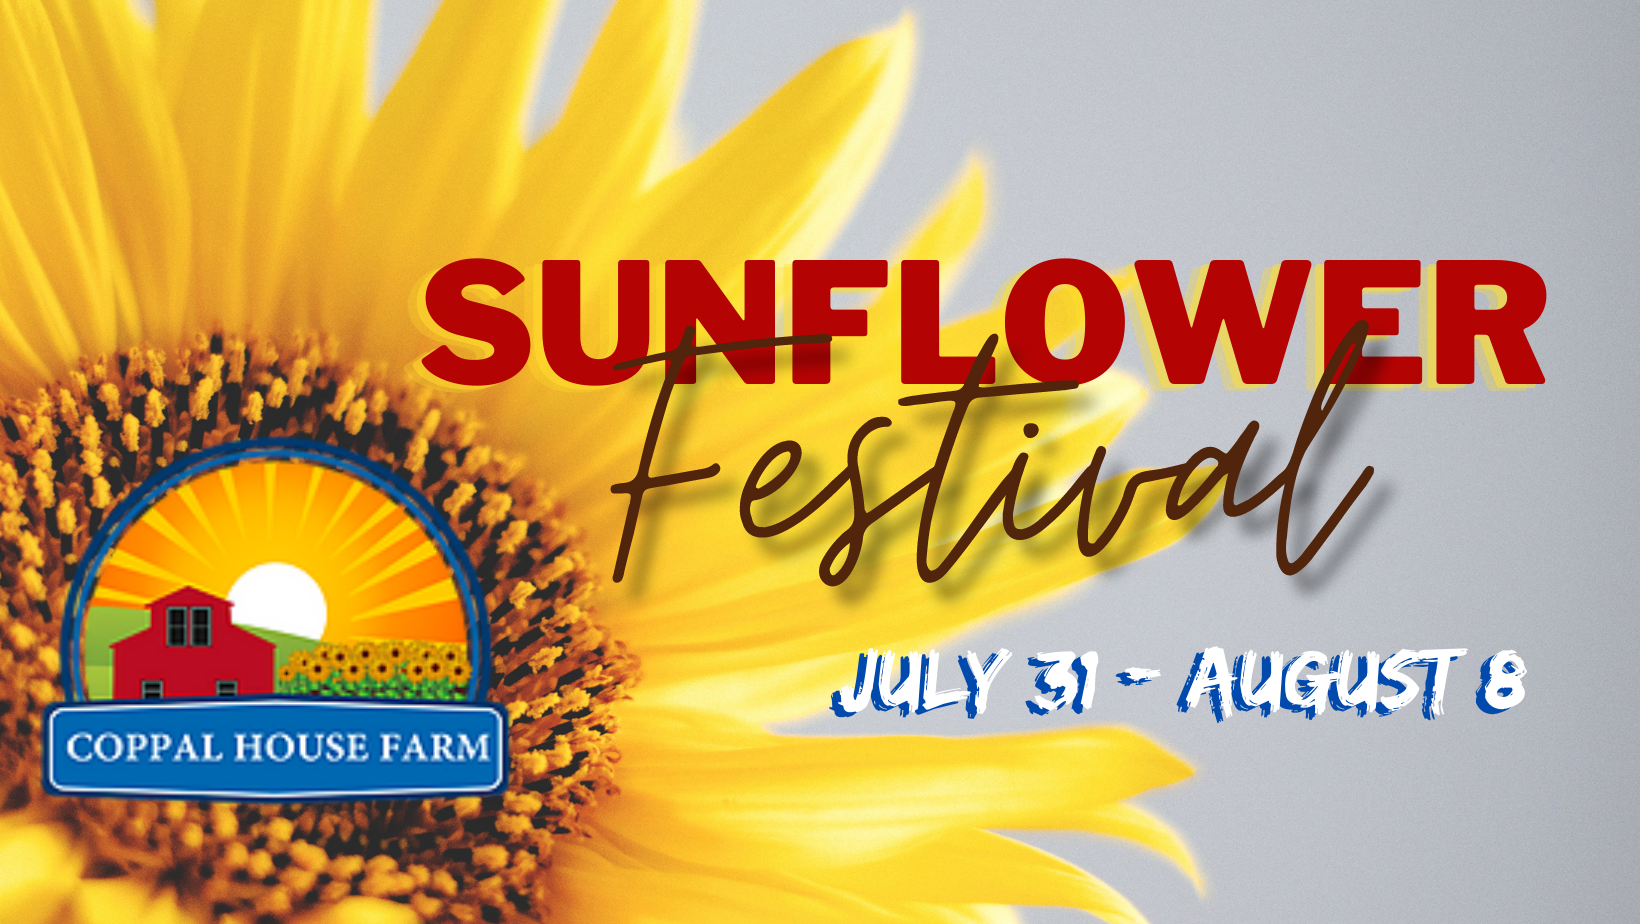 Win a 4-Pack of Tickets to the Sunflower Festival